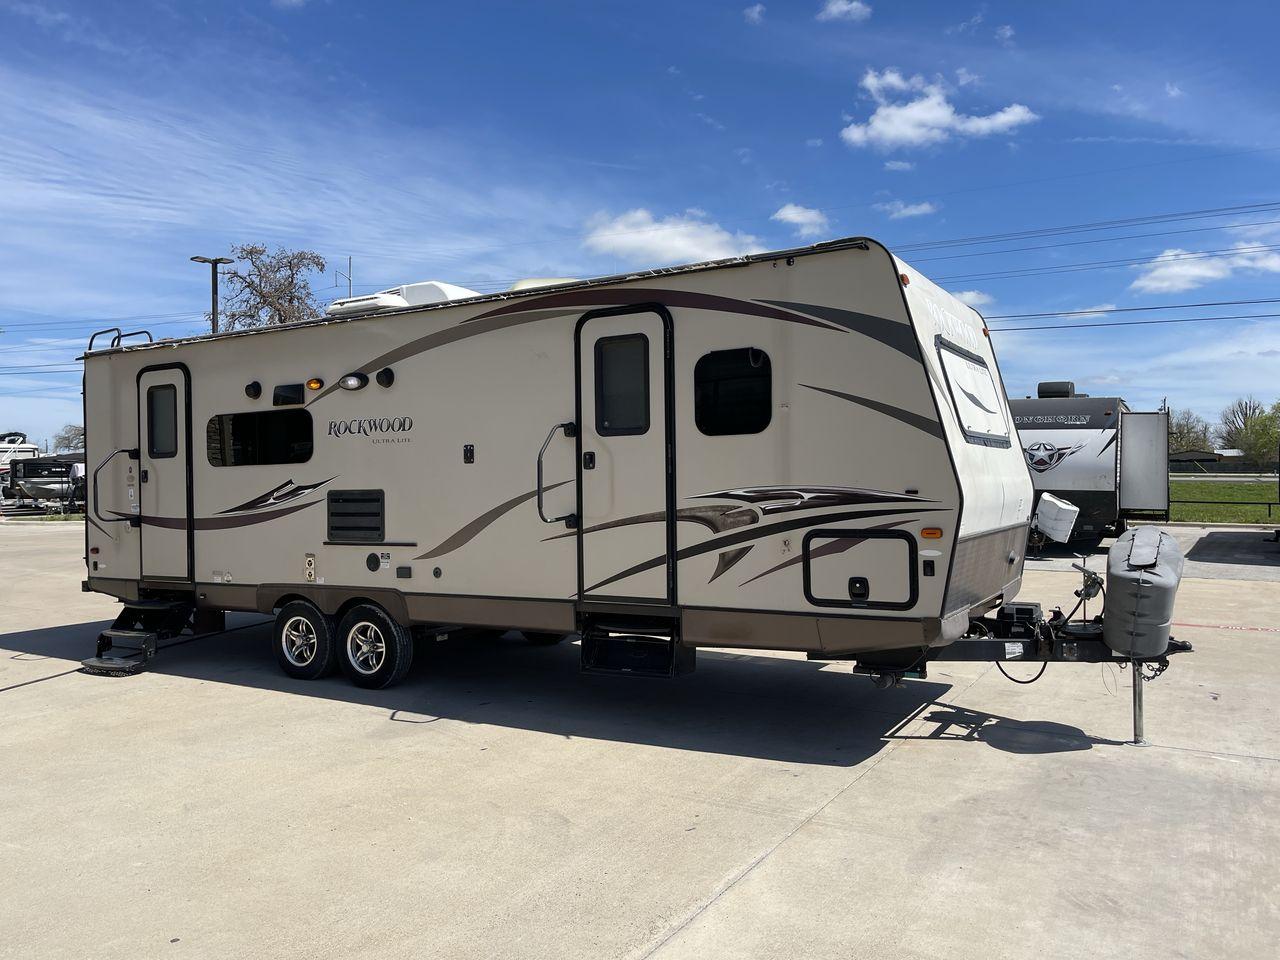 2014 FOREST RIVER ROCKWOOD 2604WS (4X4TRLB26ED) , Length: 29.67 ft. | Dry Weight: 5,665 lbs. | Slides: 2 transmission, located at 4319 N Main Street, Cleburne, TX, 76033, (817) 221-0660, 32.435829, -97.384178 - Looking for a lightweight, fully-equipped travel trailer under 30 feet? Check out this 2014 Forest River Rockwood 2604WS! This trailer measures exactly 29.67 ft. in length and 9.58 ft. in height. It has a dry weight of 5,665 lbs. and a manageable hitch weight of 711 lbs. It includes two slides and a - Photo #23